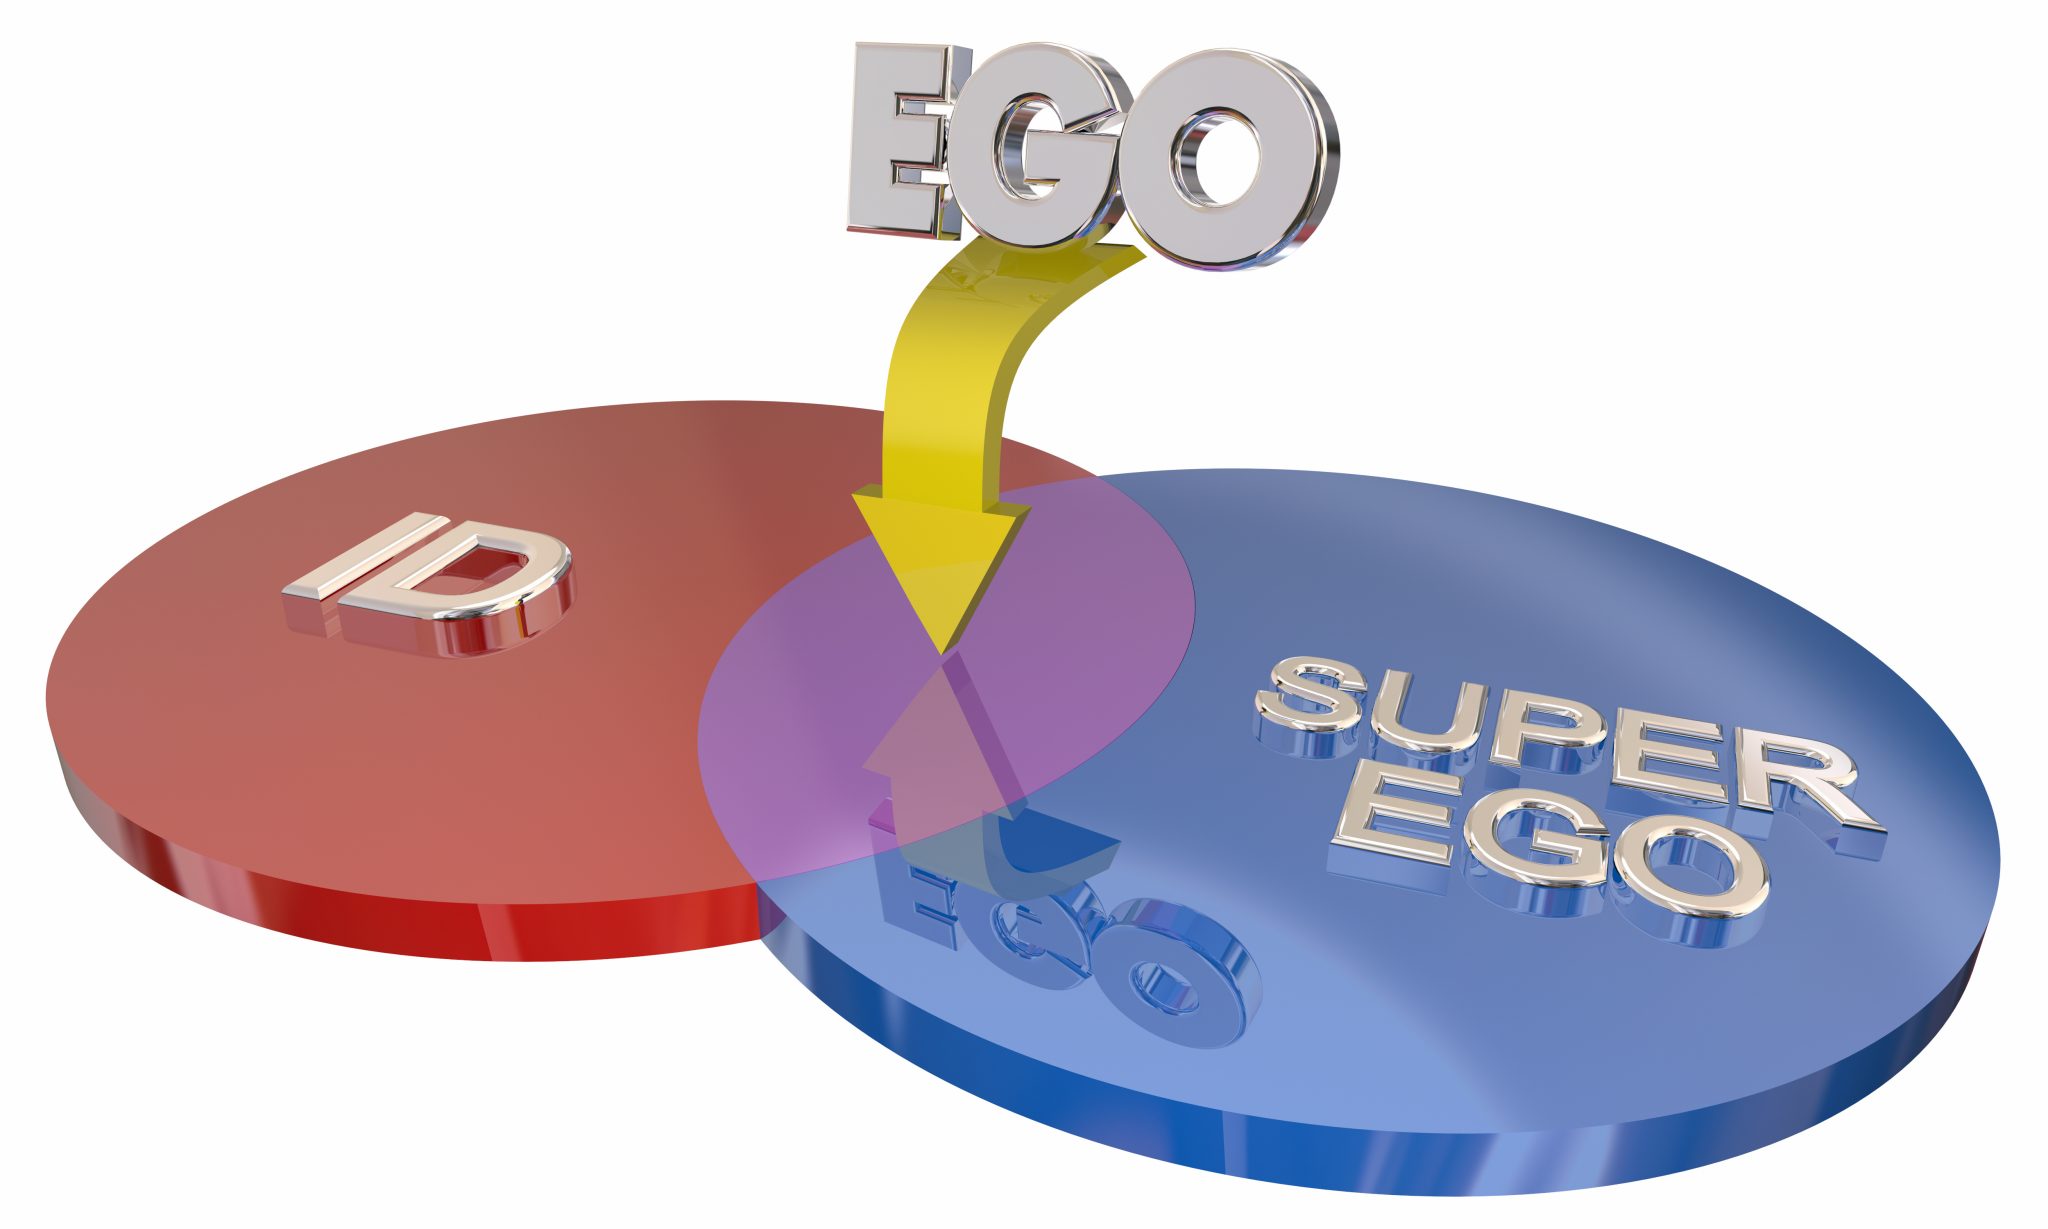 id ego and superego examples